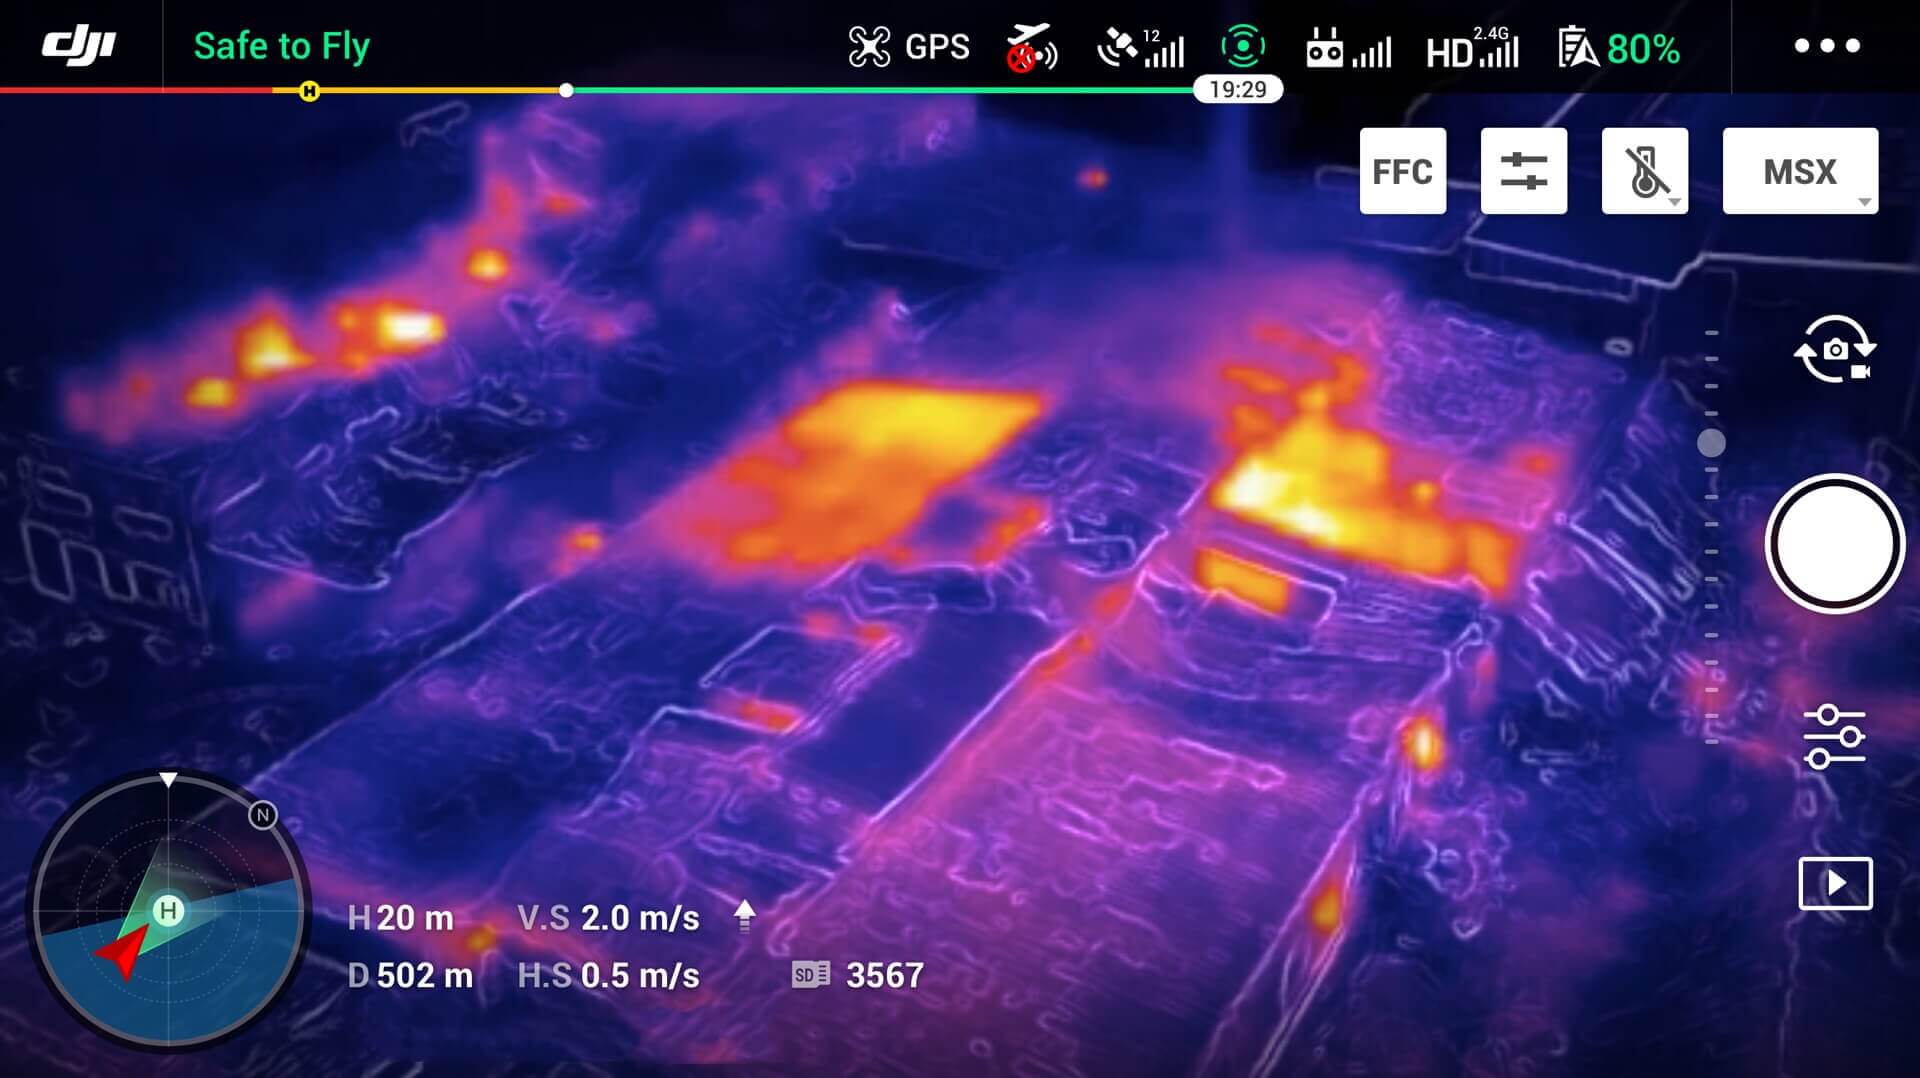 Mavic 2 Enterprise Dual’s thermal function visualized hot spots locations for responders